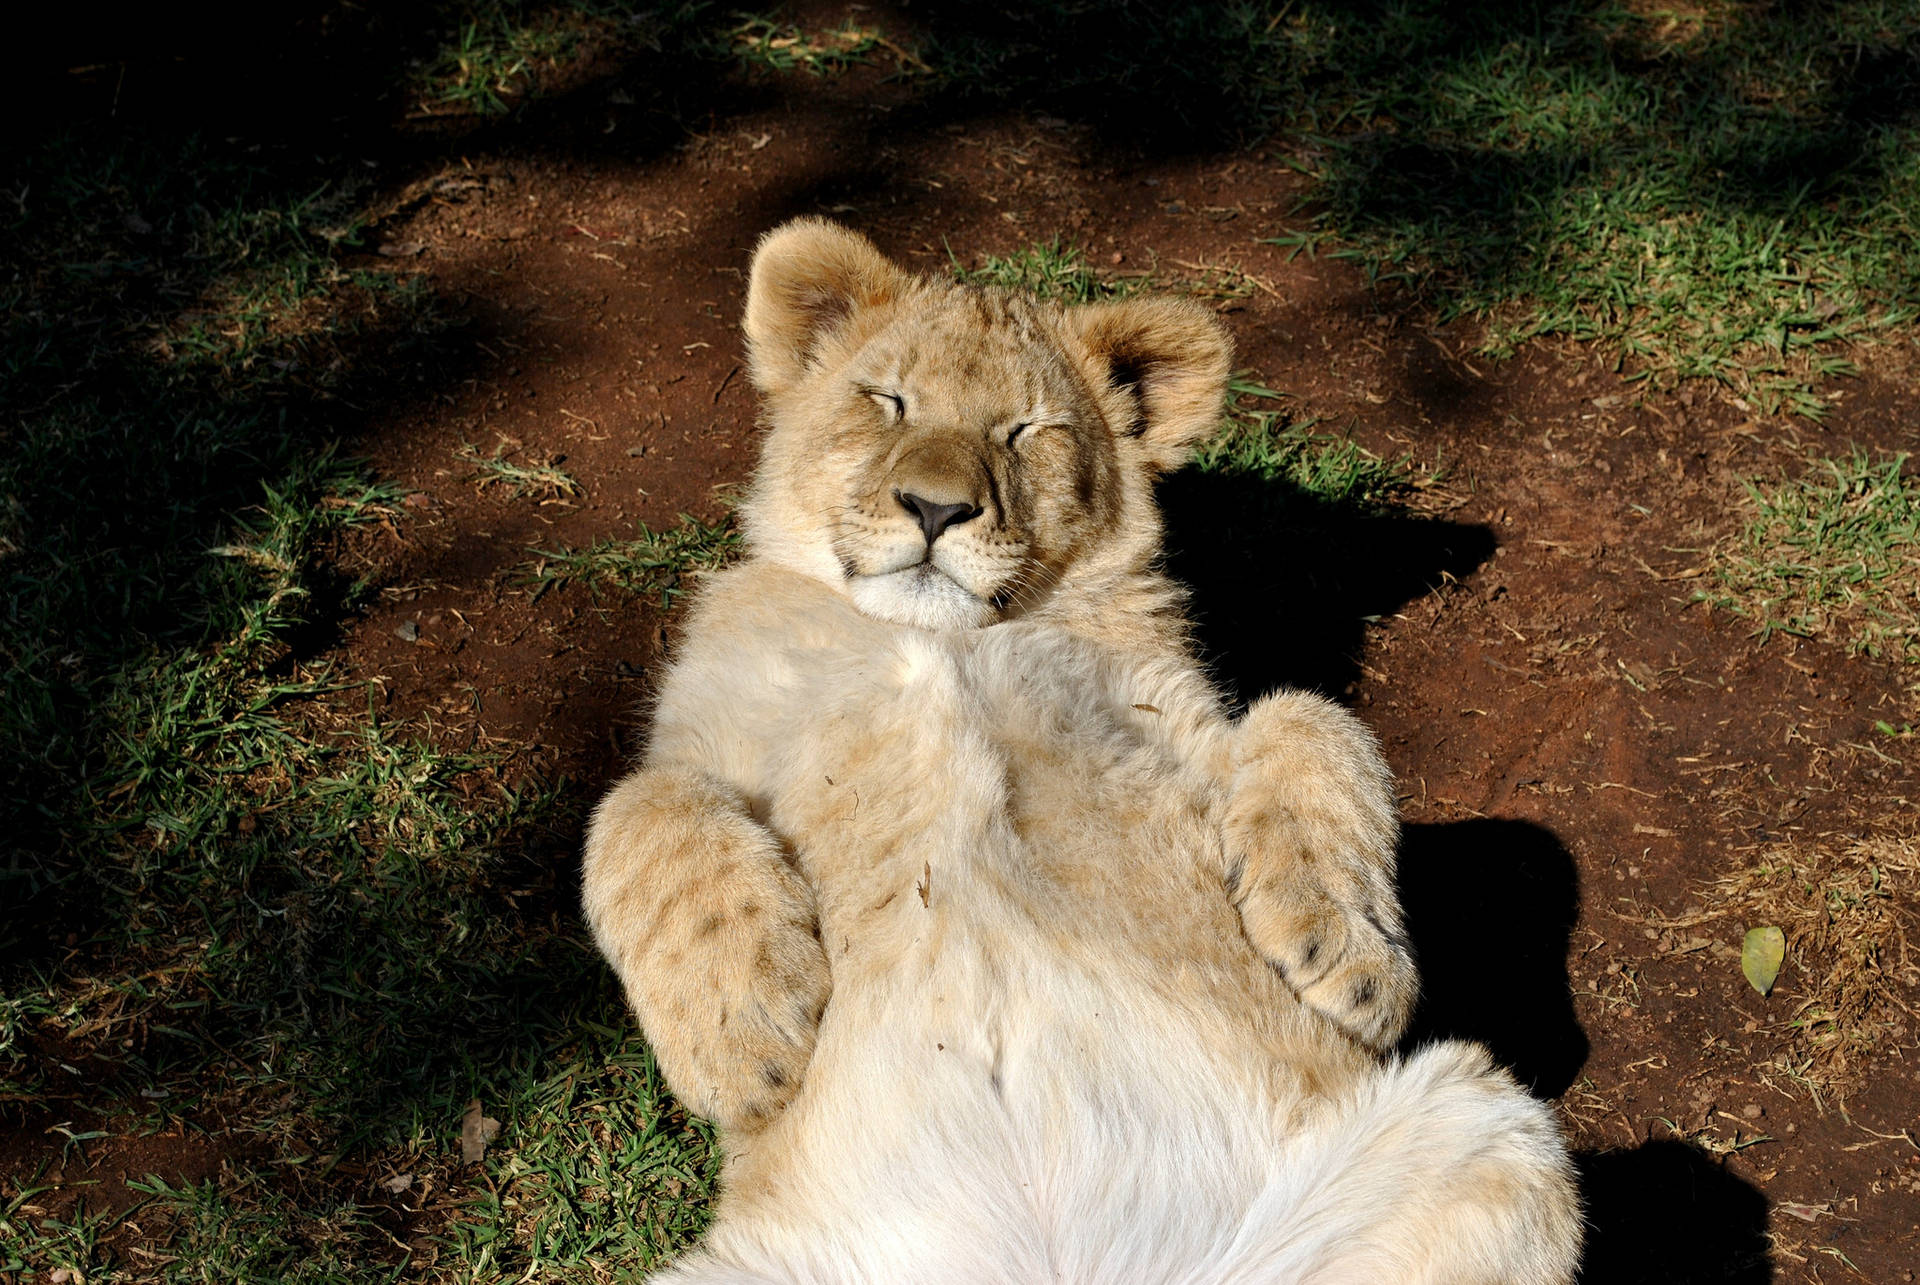 A lion cub sleeping peacefully in the sun Wallpaper